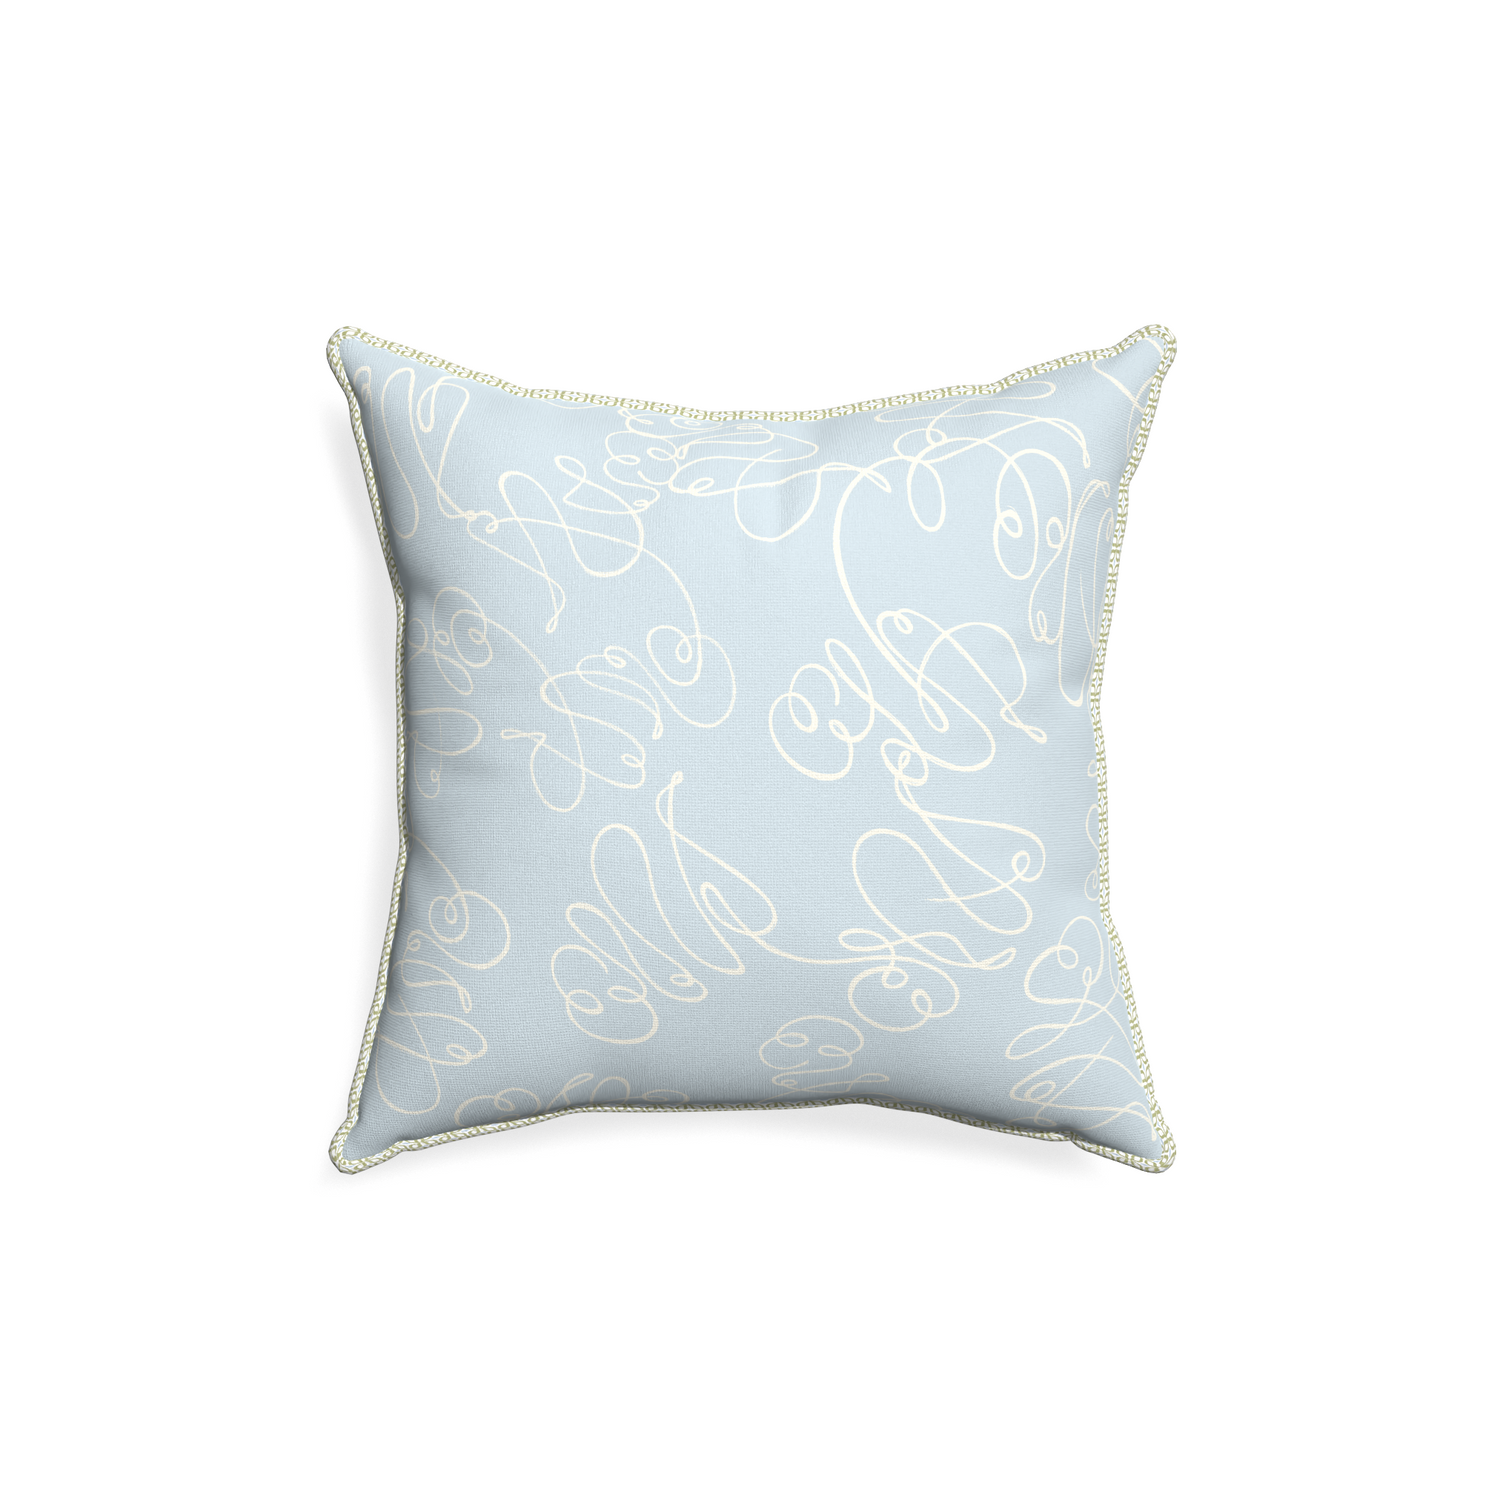 18-square mirabella custom pillow with l piping on white background